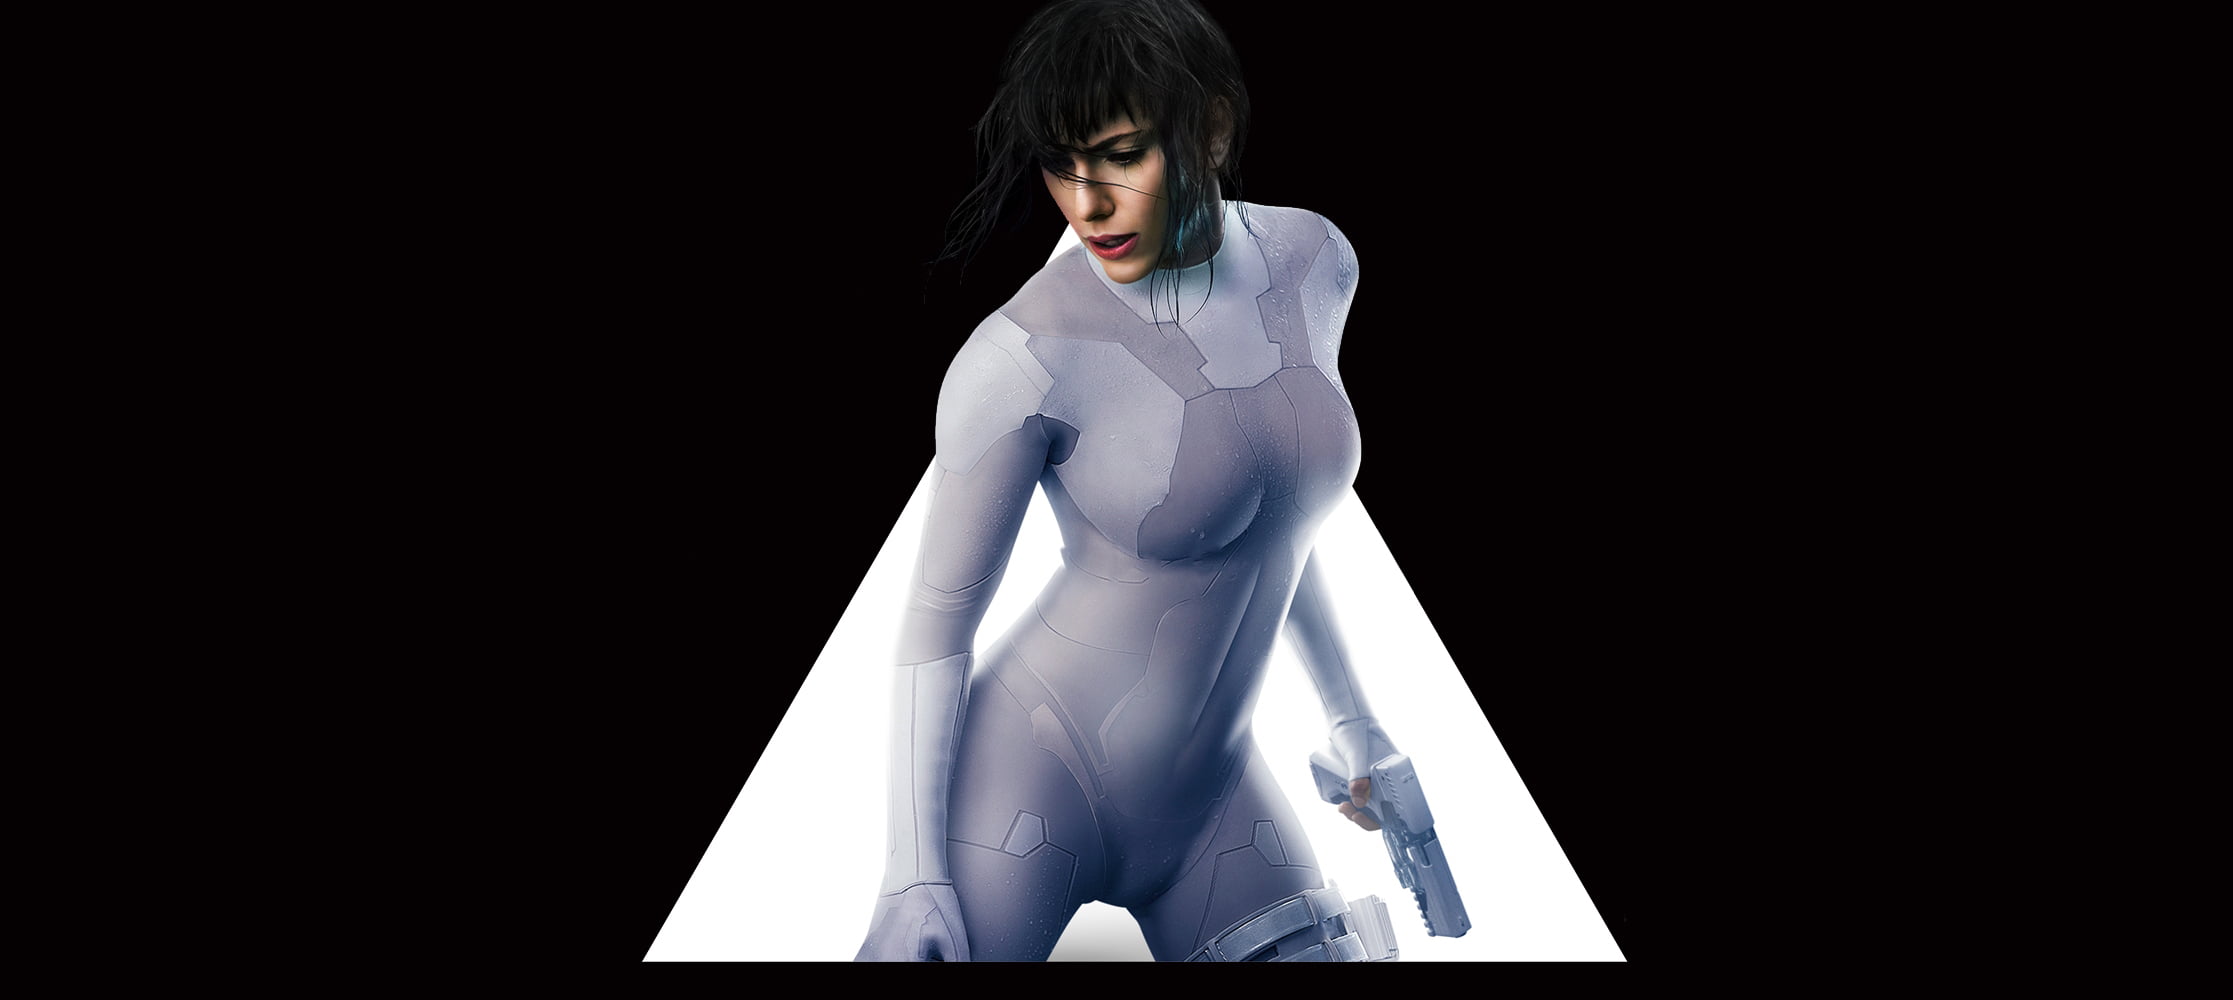 ghost in the shell, 2017 movies, black background, one person